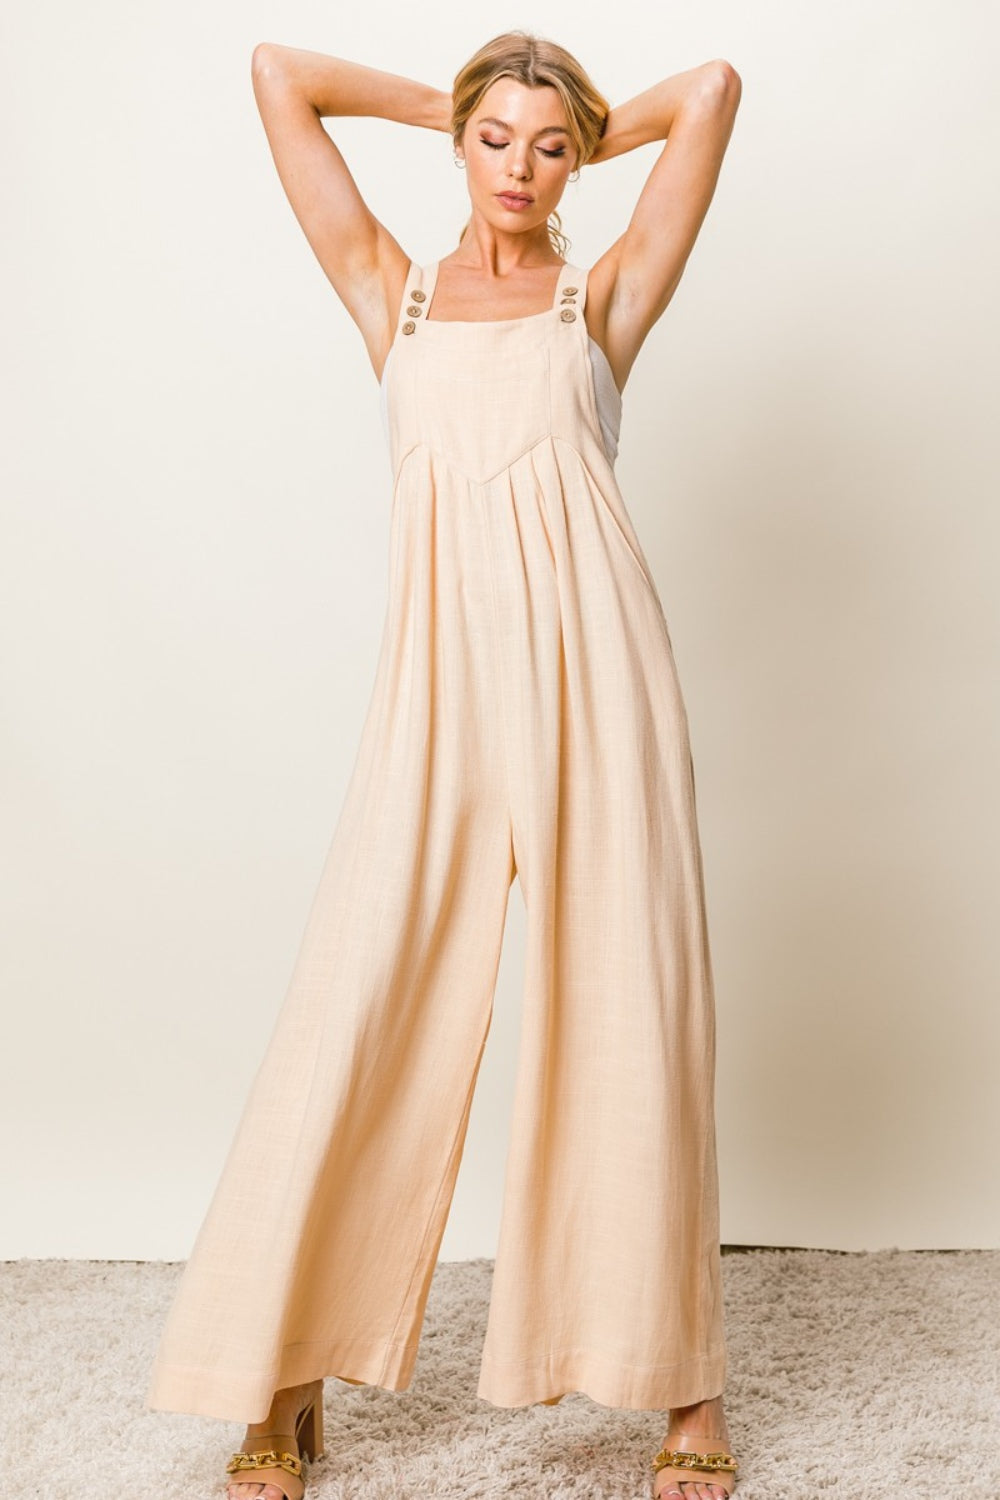 Texture Sleeveless Wide Leg Jumpsuit by BiBi - Wildly Max